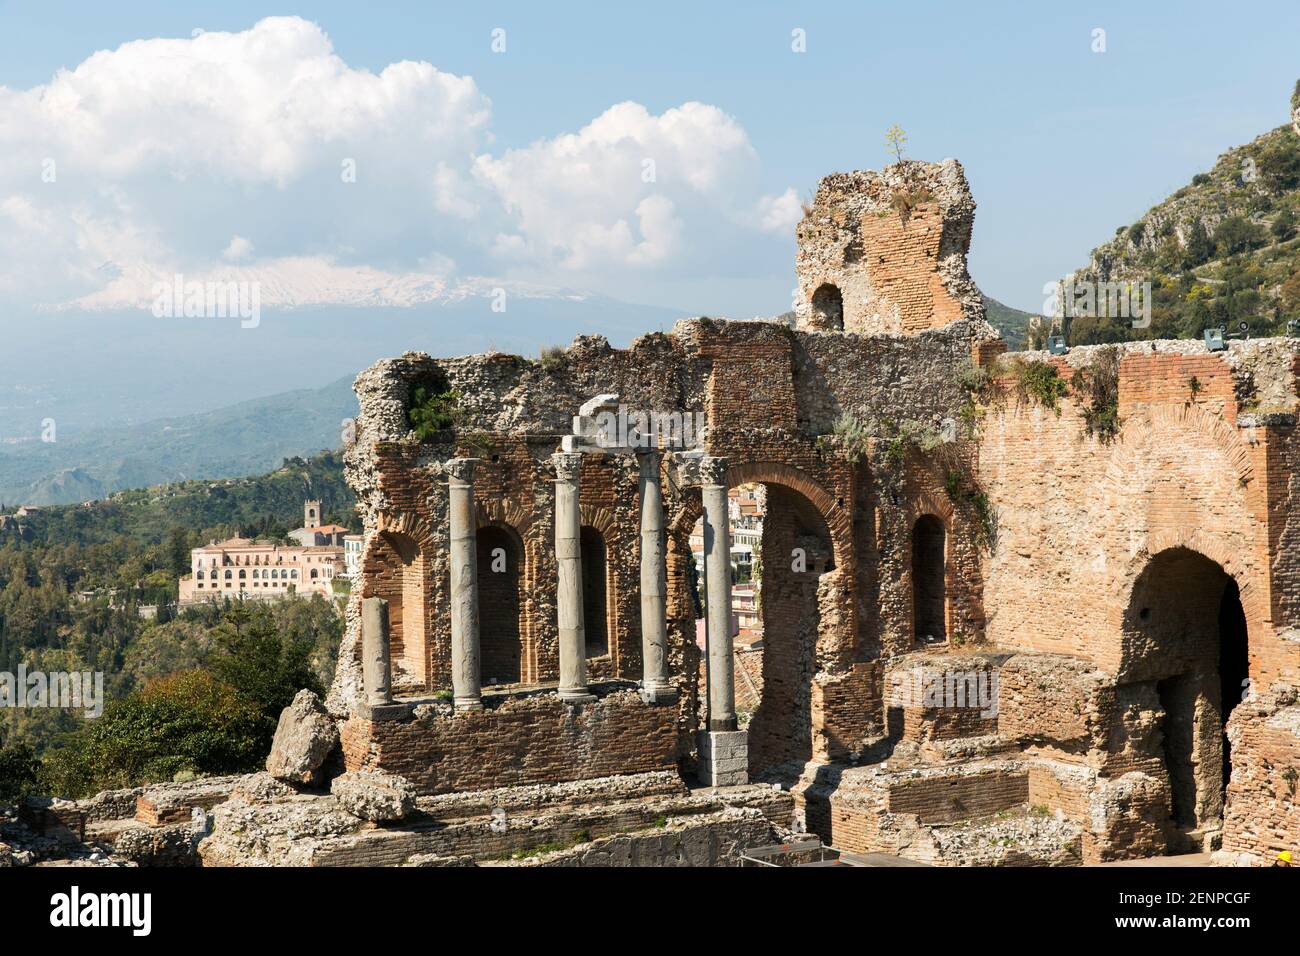 Italy,Sicily,Taormina, The Greek Theatre, with the city of Taormina and Mount Etna in the background. Stock Photo